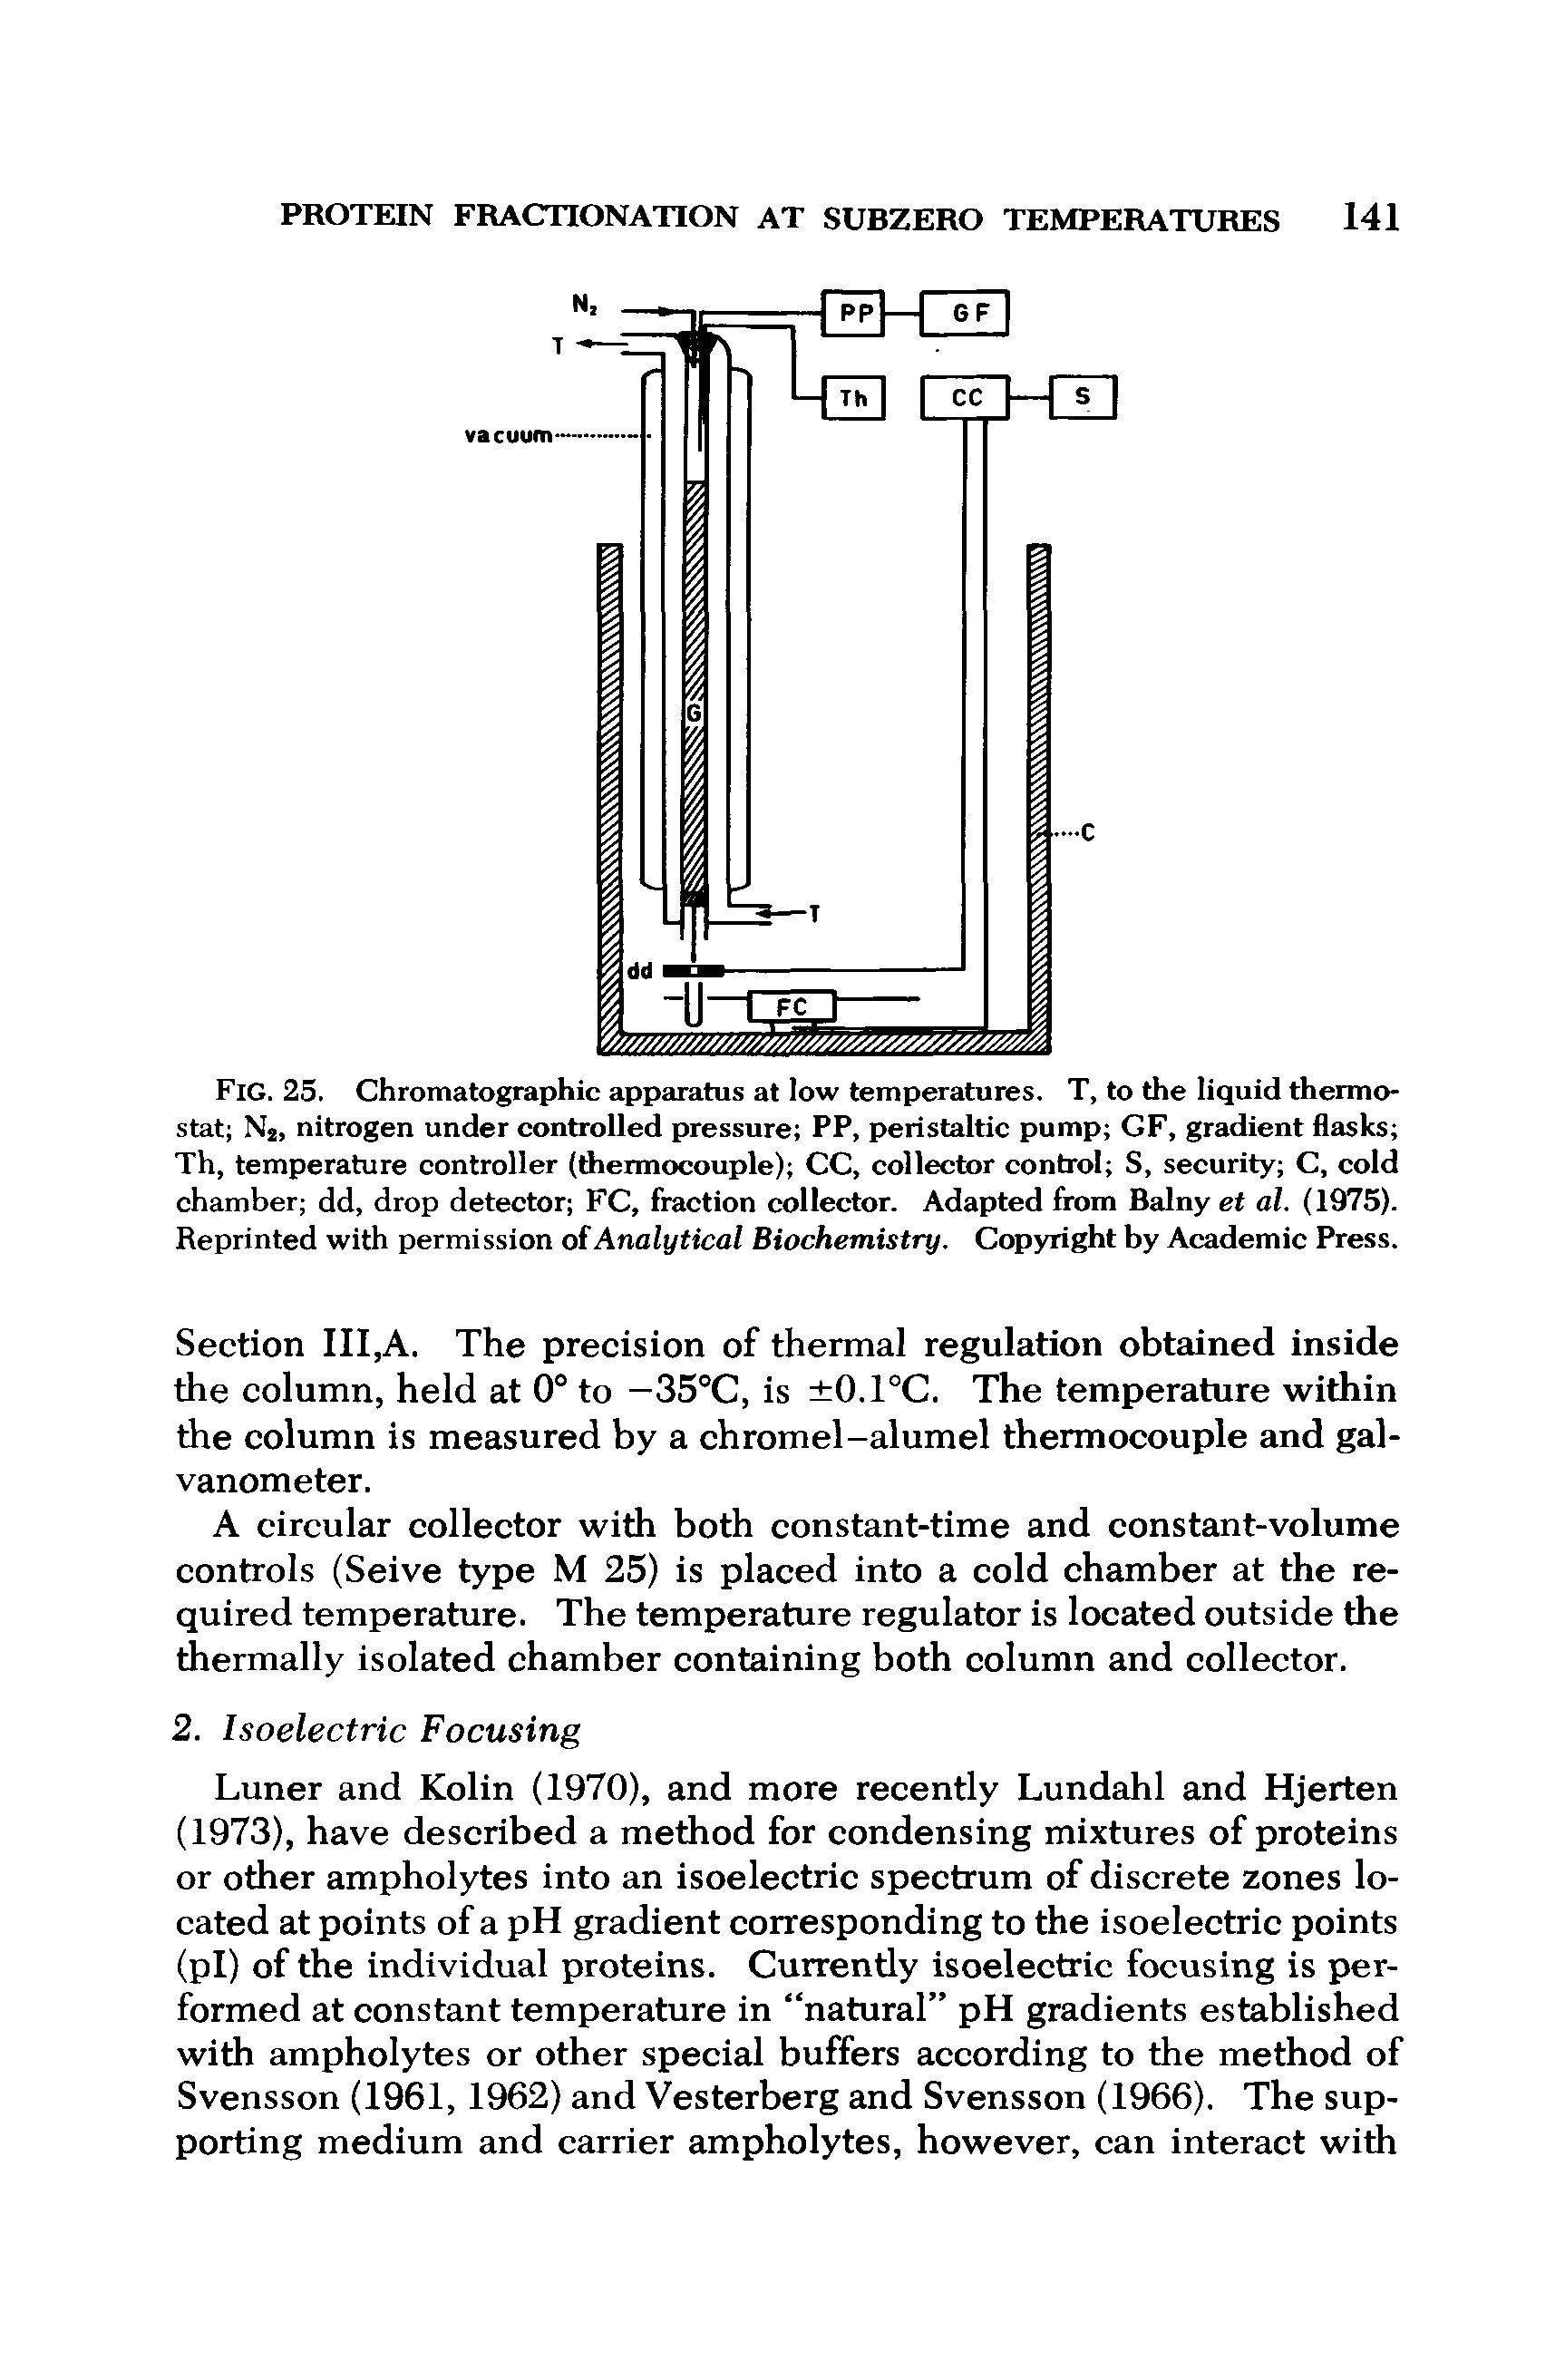 Fig. 25. Chromatographic apparatus at low temperatures. T, to the liquid thermostat Ni, nitrogen under controlled pressure PP, peristaltic pump GF, gradient flasks Th, temperature controller (thermocouple) CC, collector control S, security C, cold chamber dd, drop detector FC, fraction collector. Adapted from Balny et al. (1975). Reprinted with permission of Analytical Biochemistry. Copyright by Academic Press.